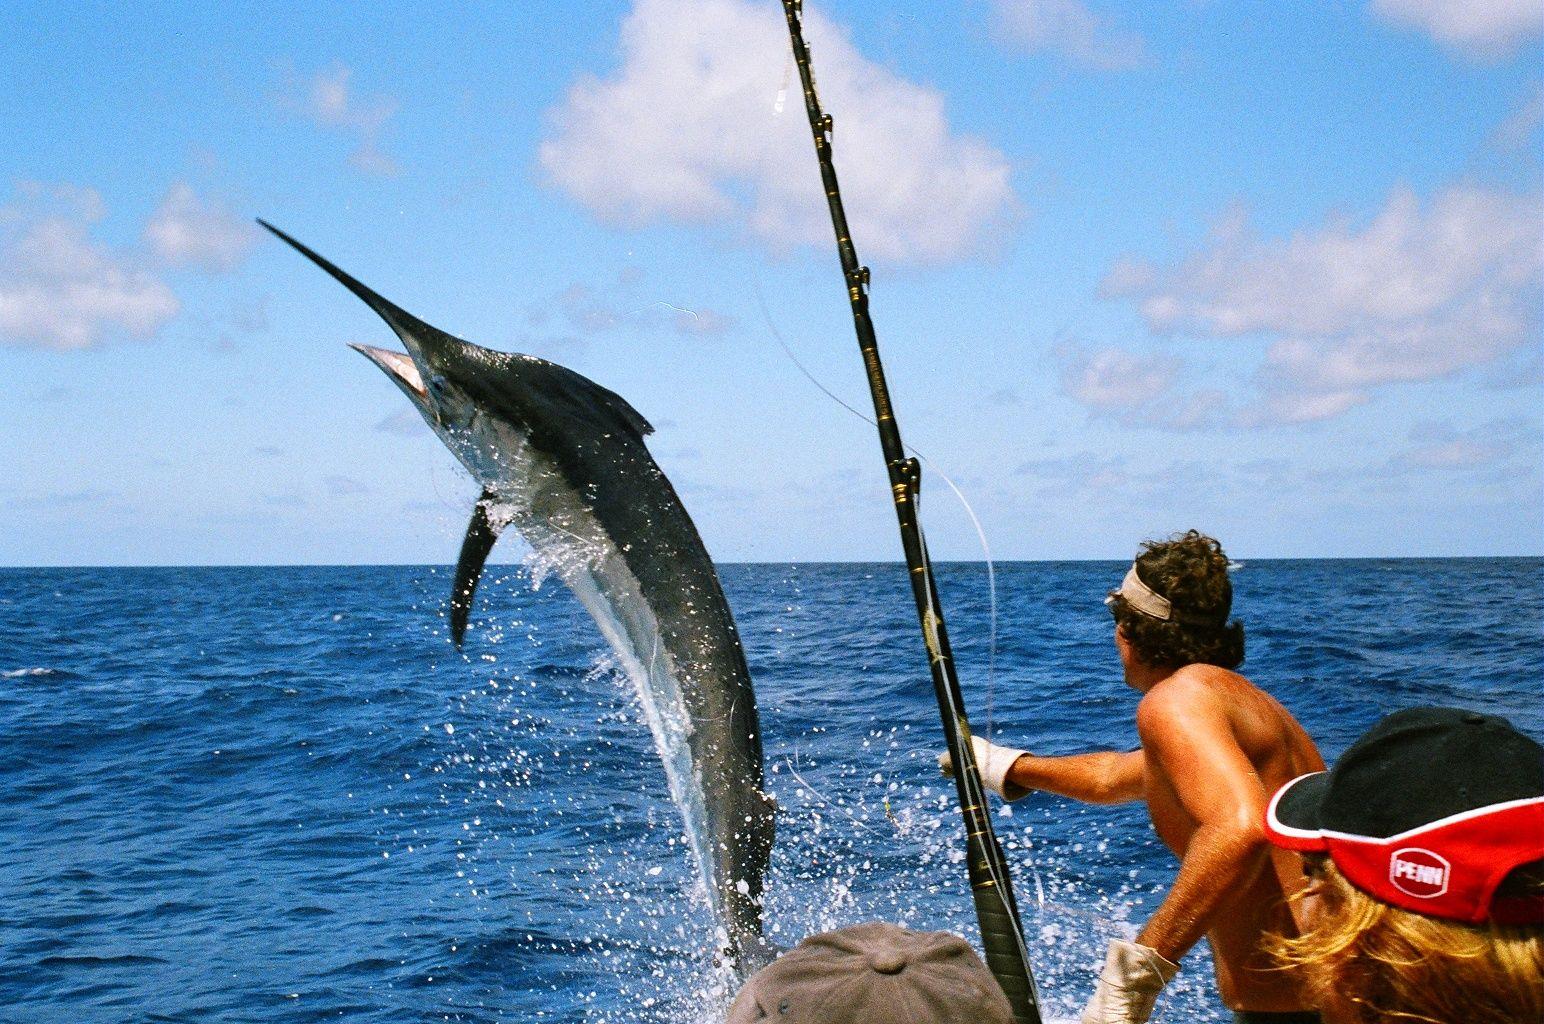 Go deep sea fishing and learn to prepare and cook your catch